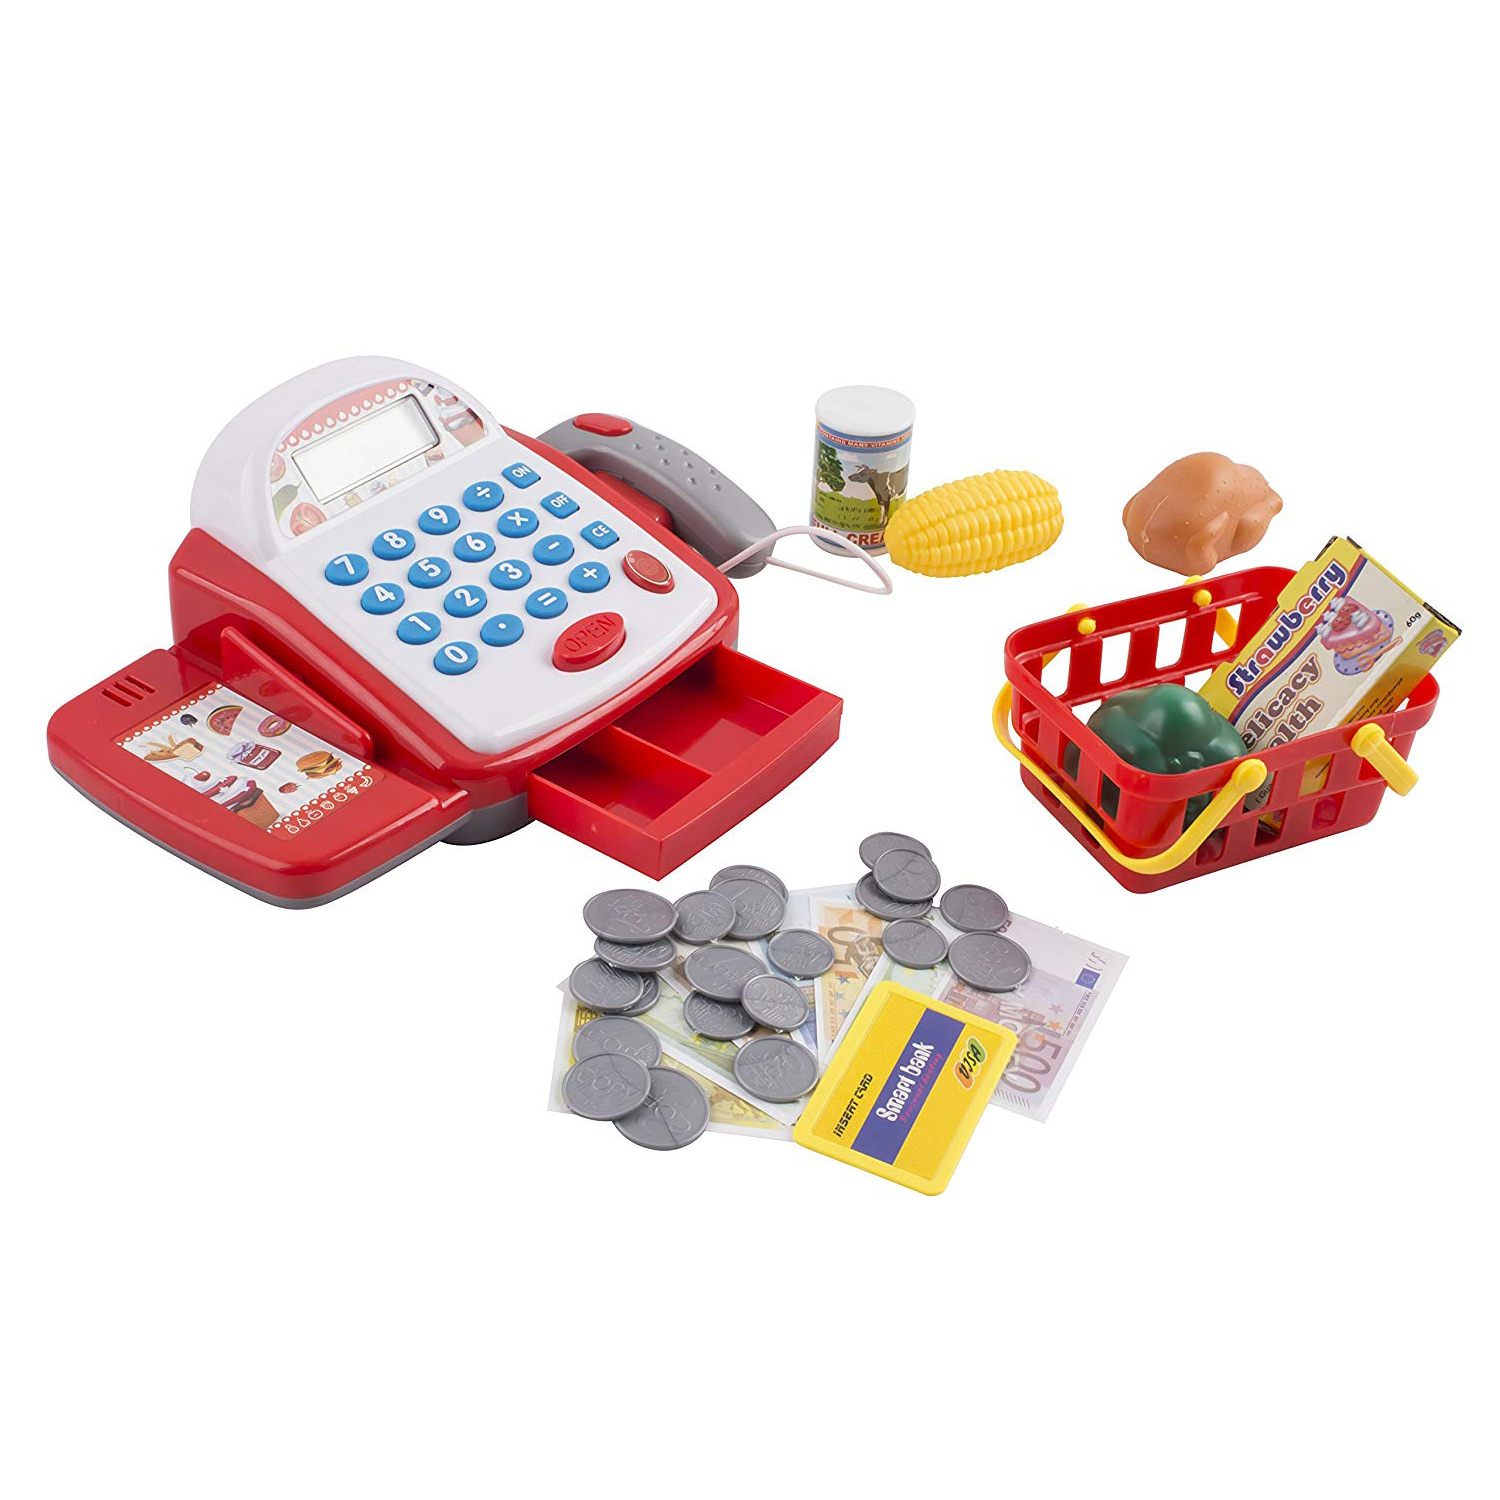 Toddler Interactive Learning Tools CISAY Toy Cash Register,C8 Pretend Play Educational Toys with Sounds,Scanner,Card Reader,Grocery Toy Set for Kids Boys and Girls Gifts 